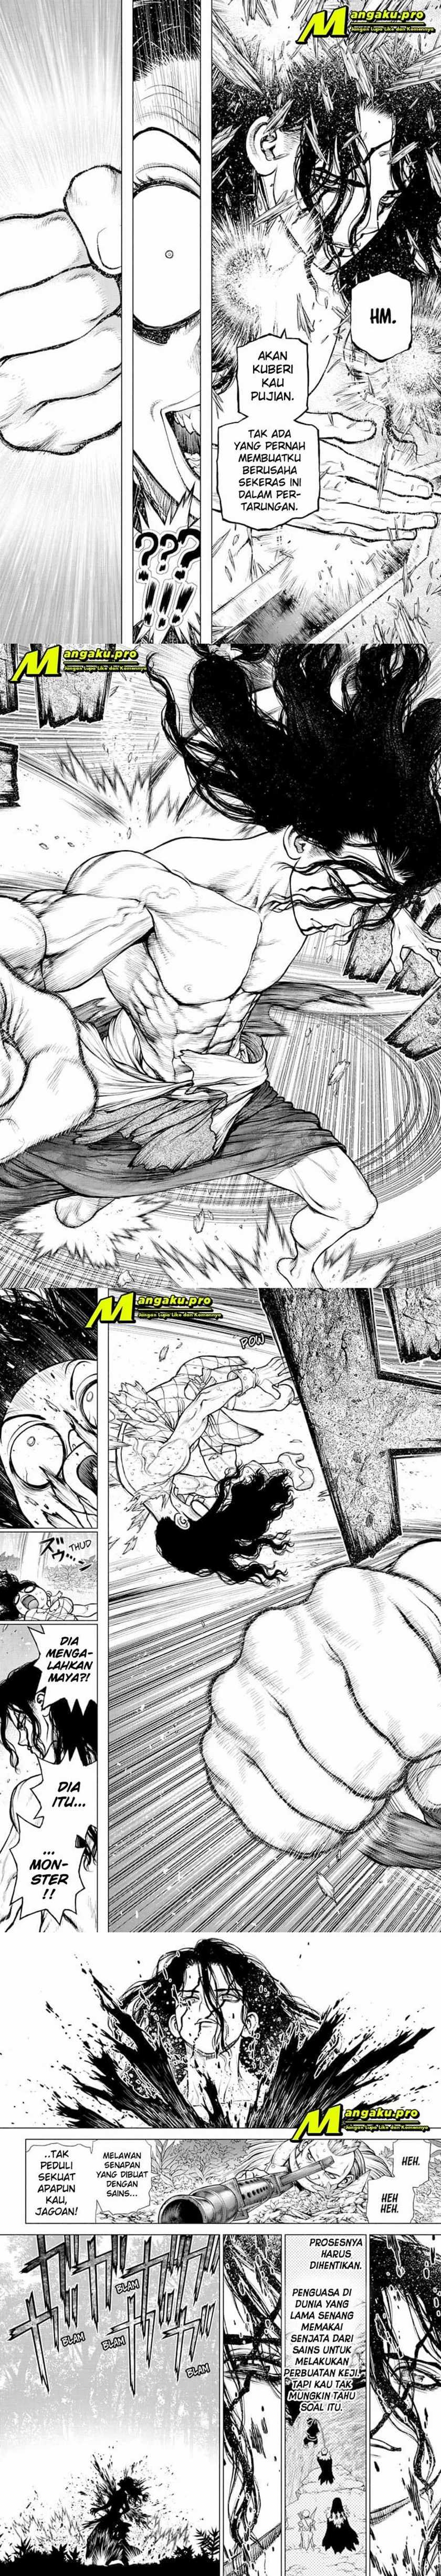 Dr Stone Chapter 188